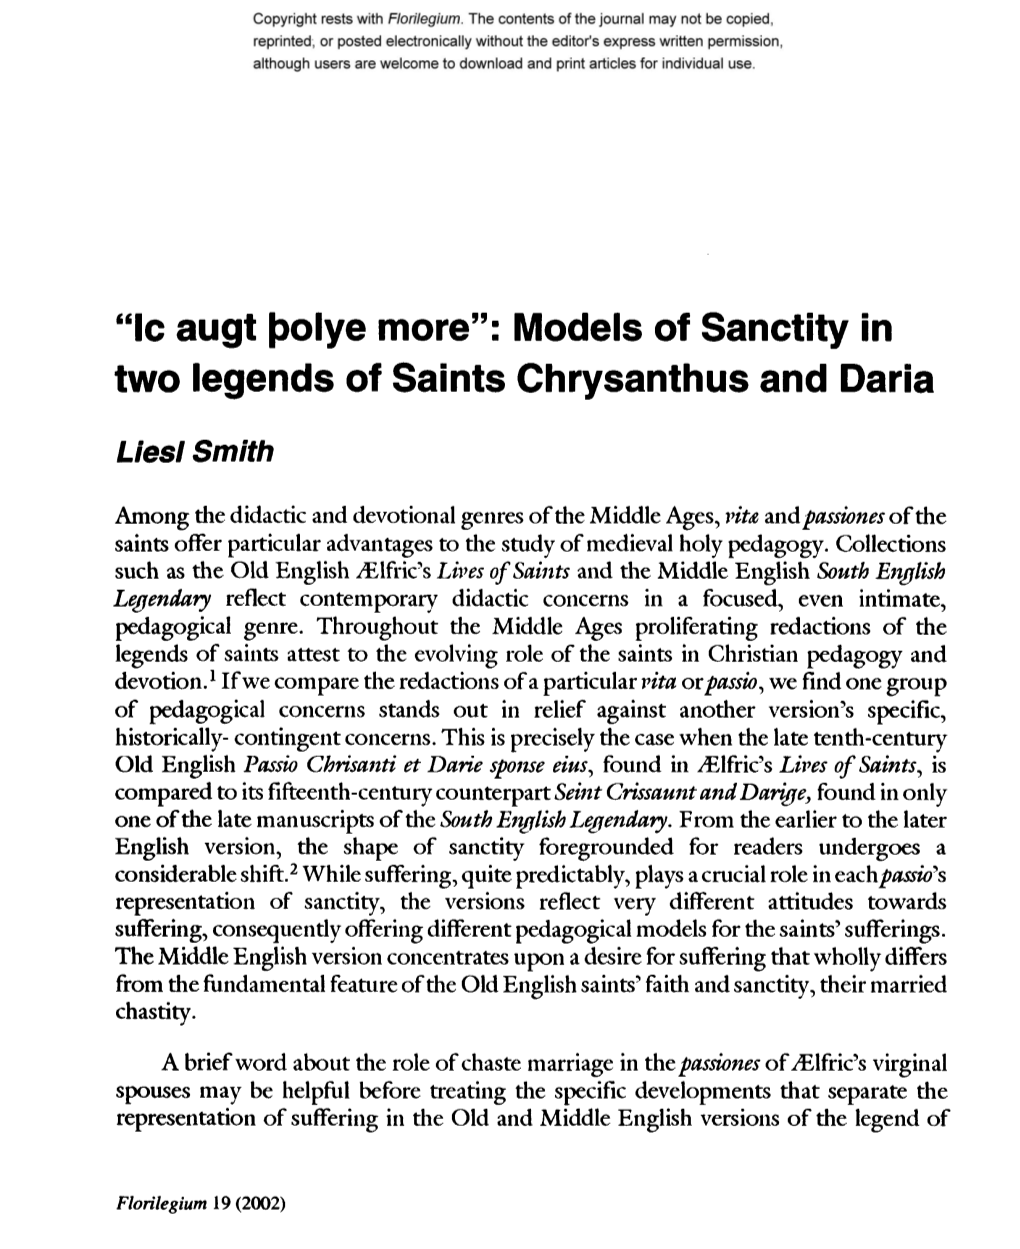 "Le Augt ßolye More": Models of Sanctity in Two Legends of Saints Chrysanthus and Daria Liest Smith